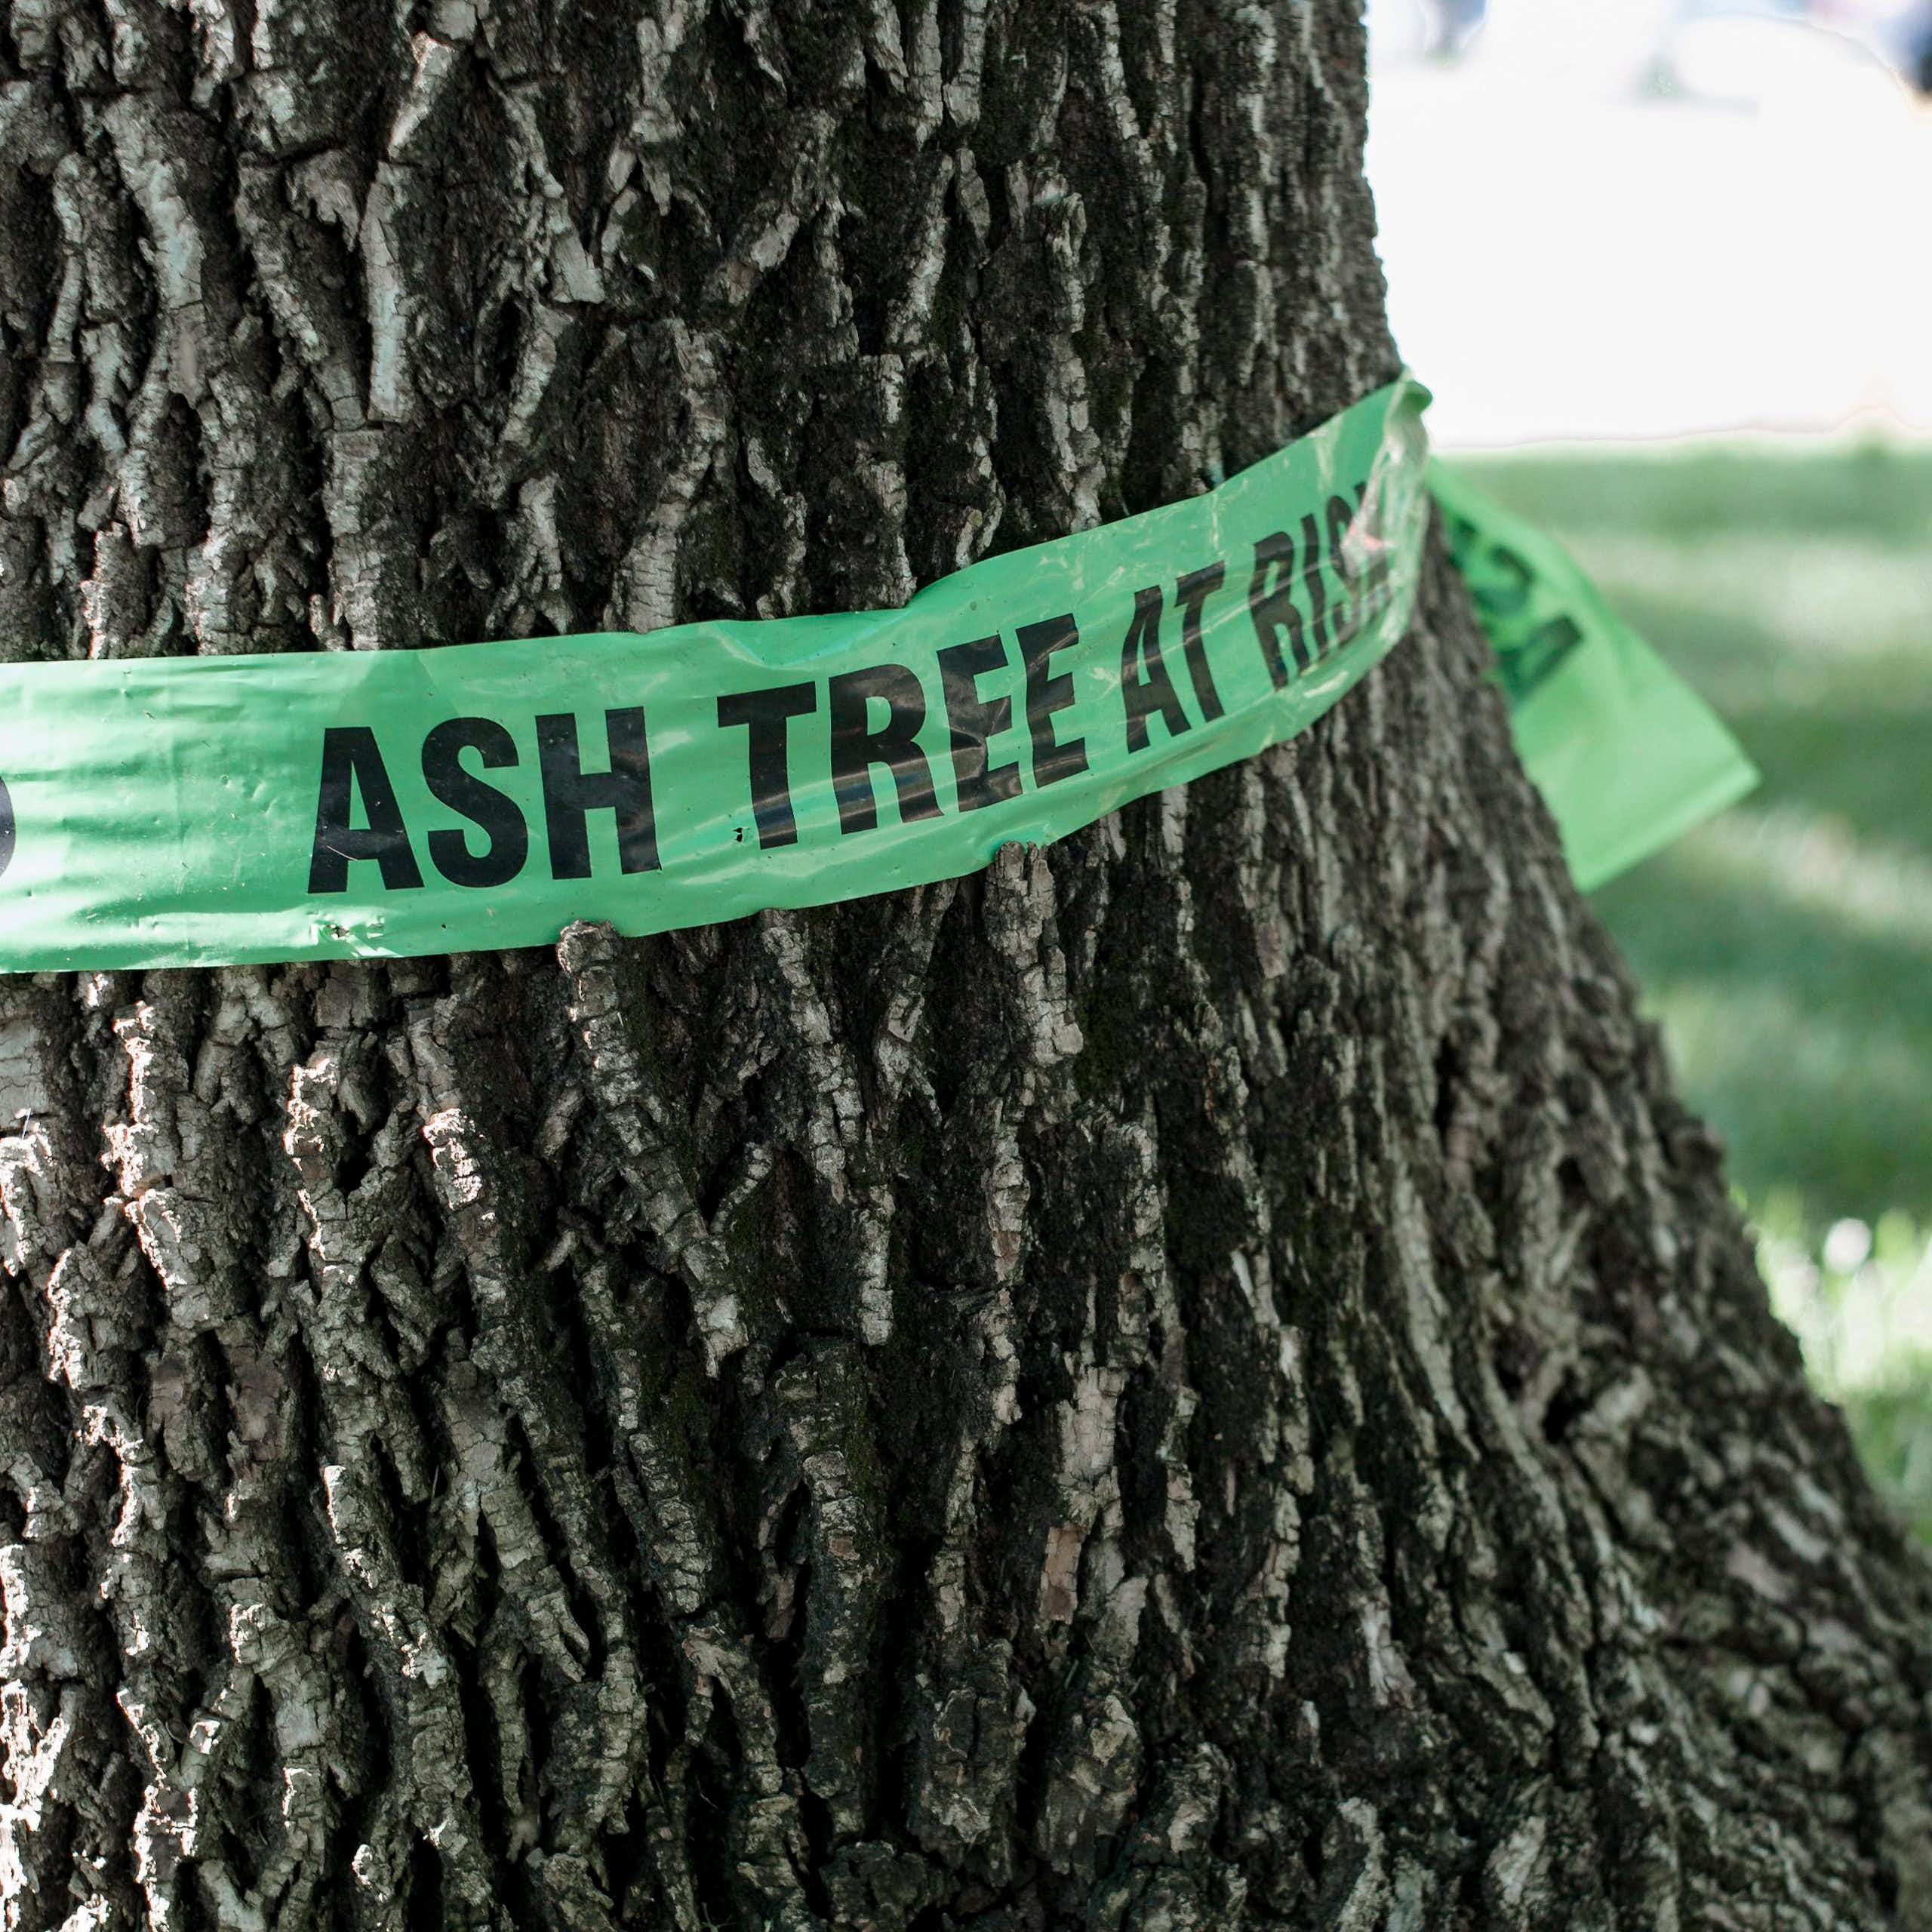 A tree is shown with a green ribbon around it.